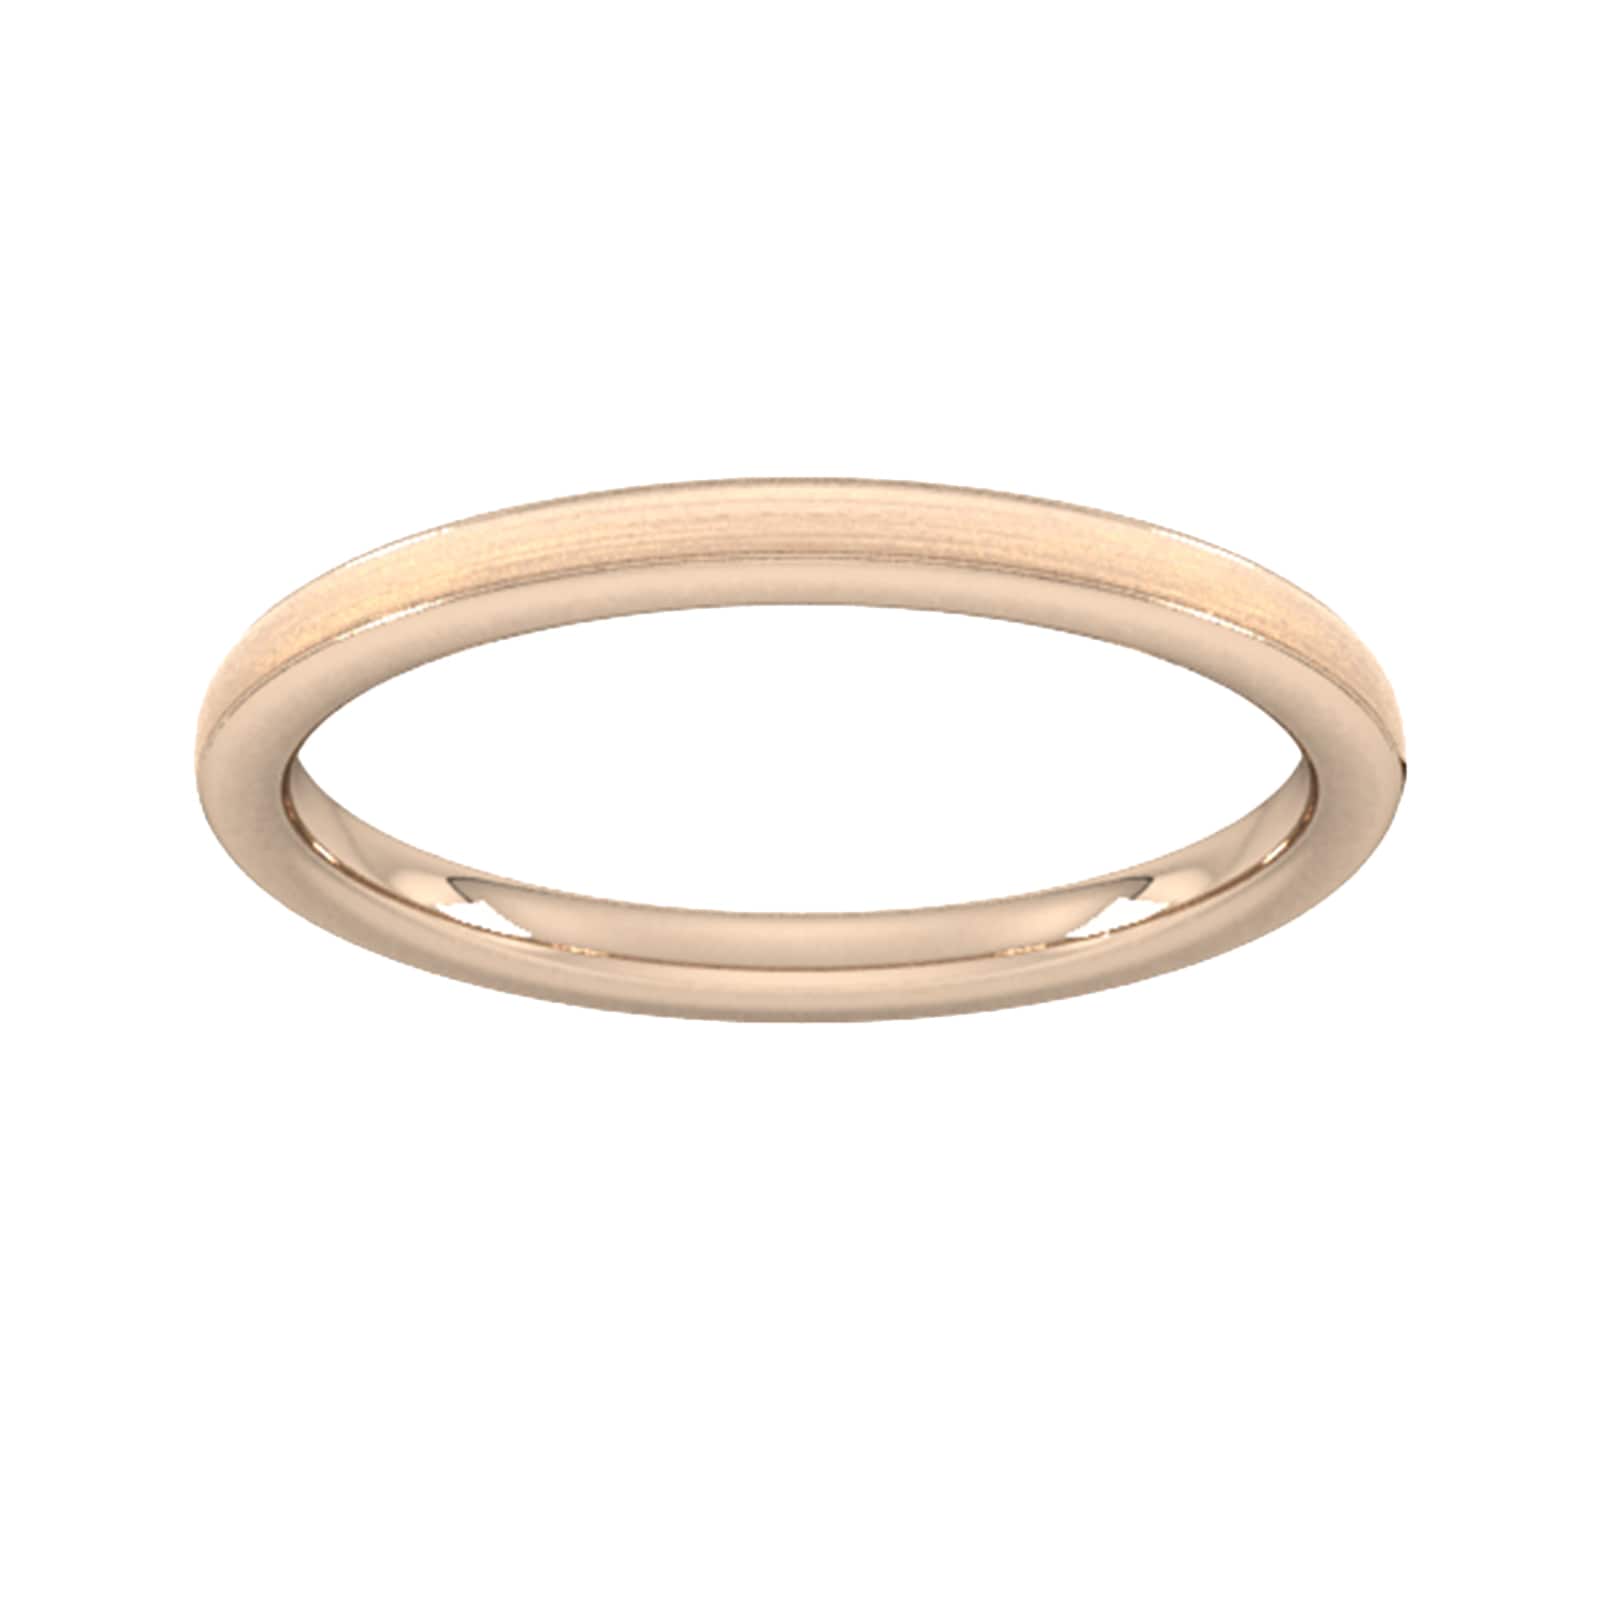 2mm Flat Court Heavy Matt Centre With Grooves Wedding Ring In 18 Carat Rose Gold - Ring Size K